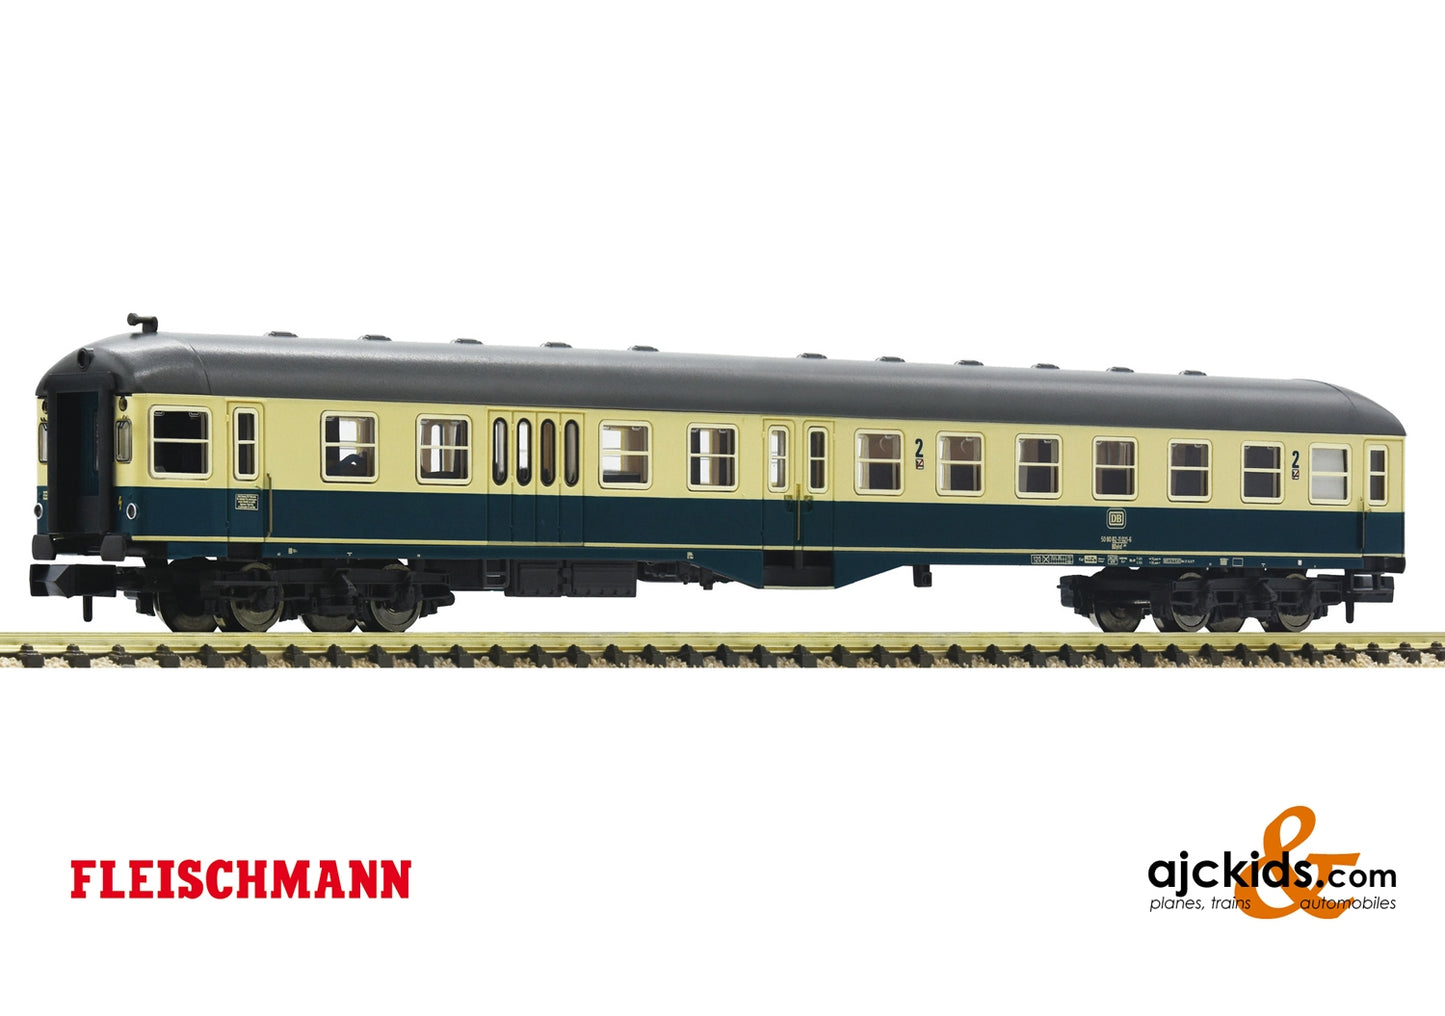 Fleischmann 866487 - 2nd class center entry coach with control cab and baggage compartment